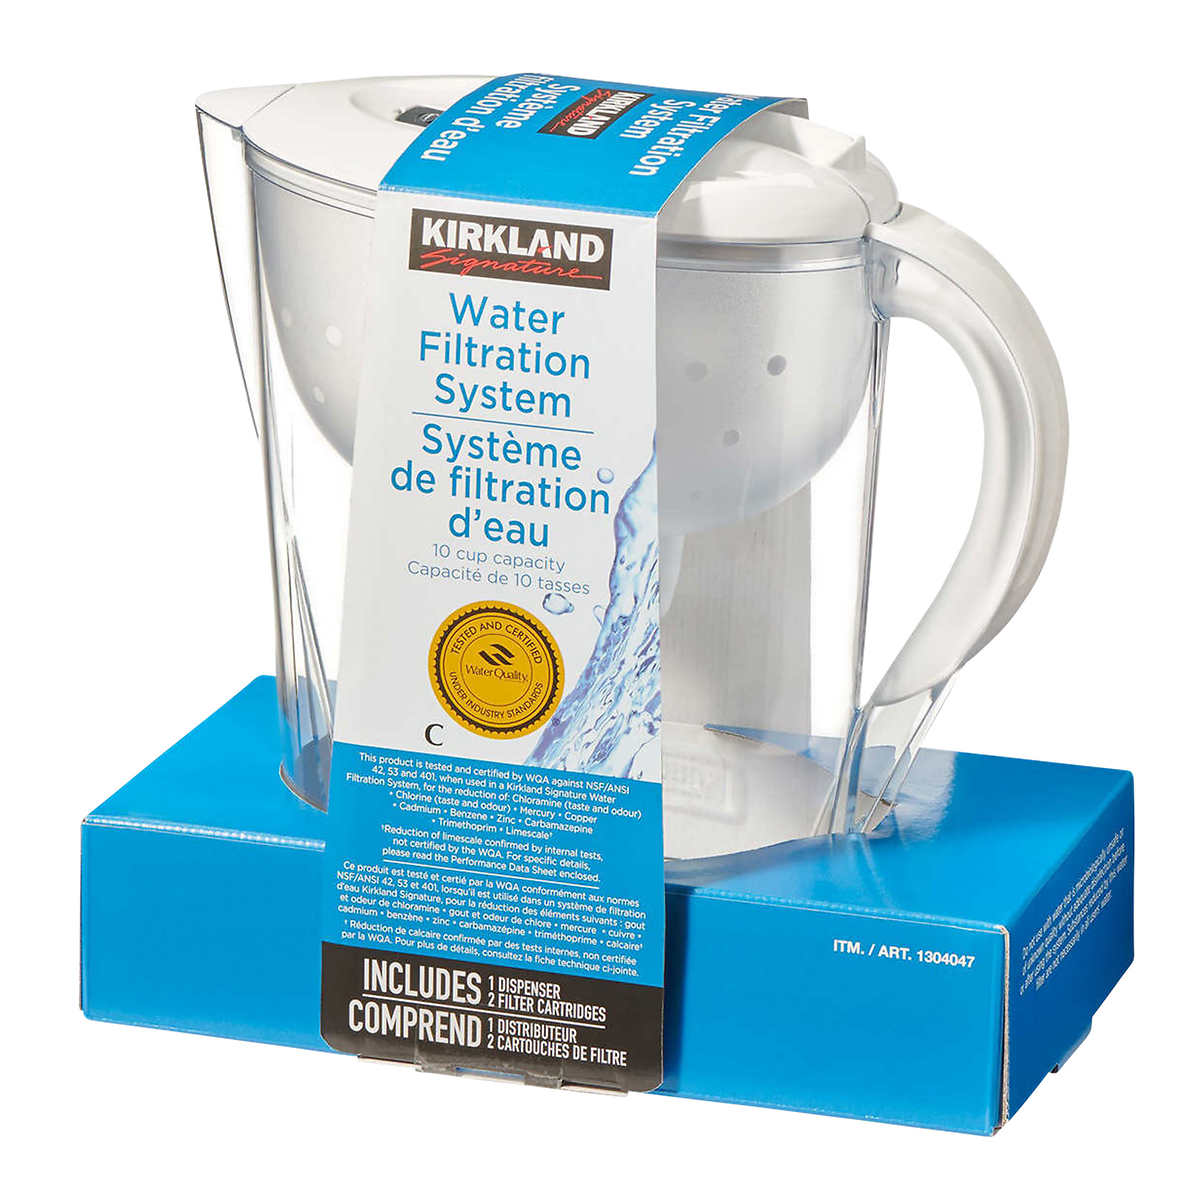 No Filters Details about   Kirkland Signature Water Filtration System 10 Cup Pitcher Used 